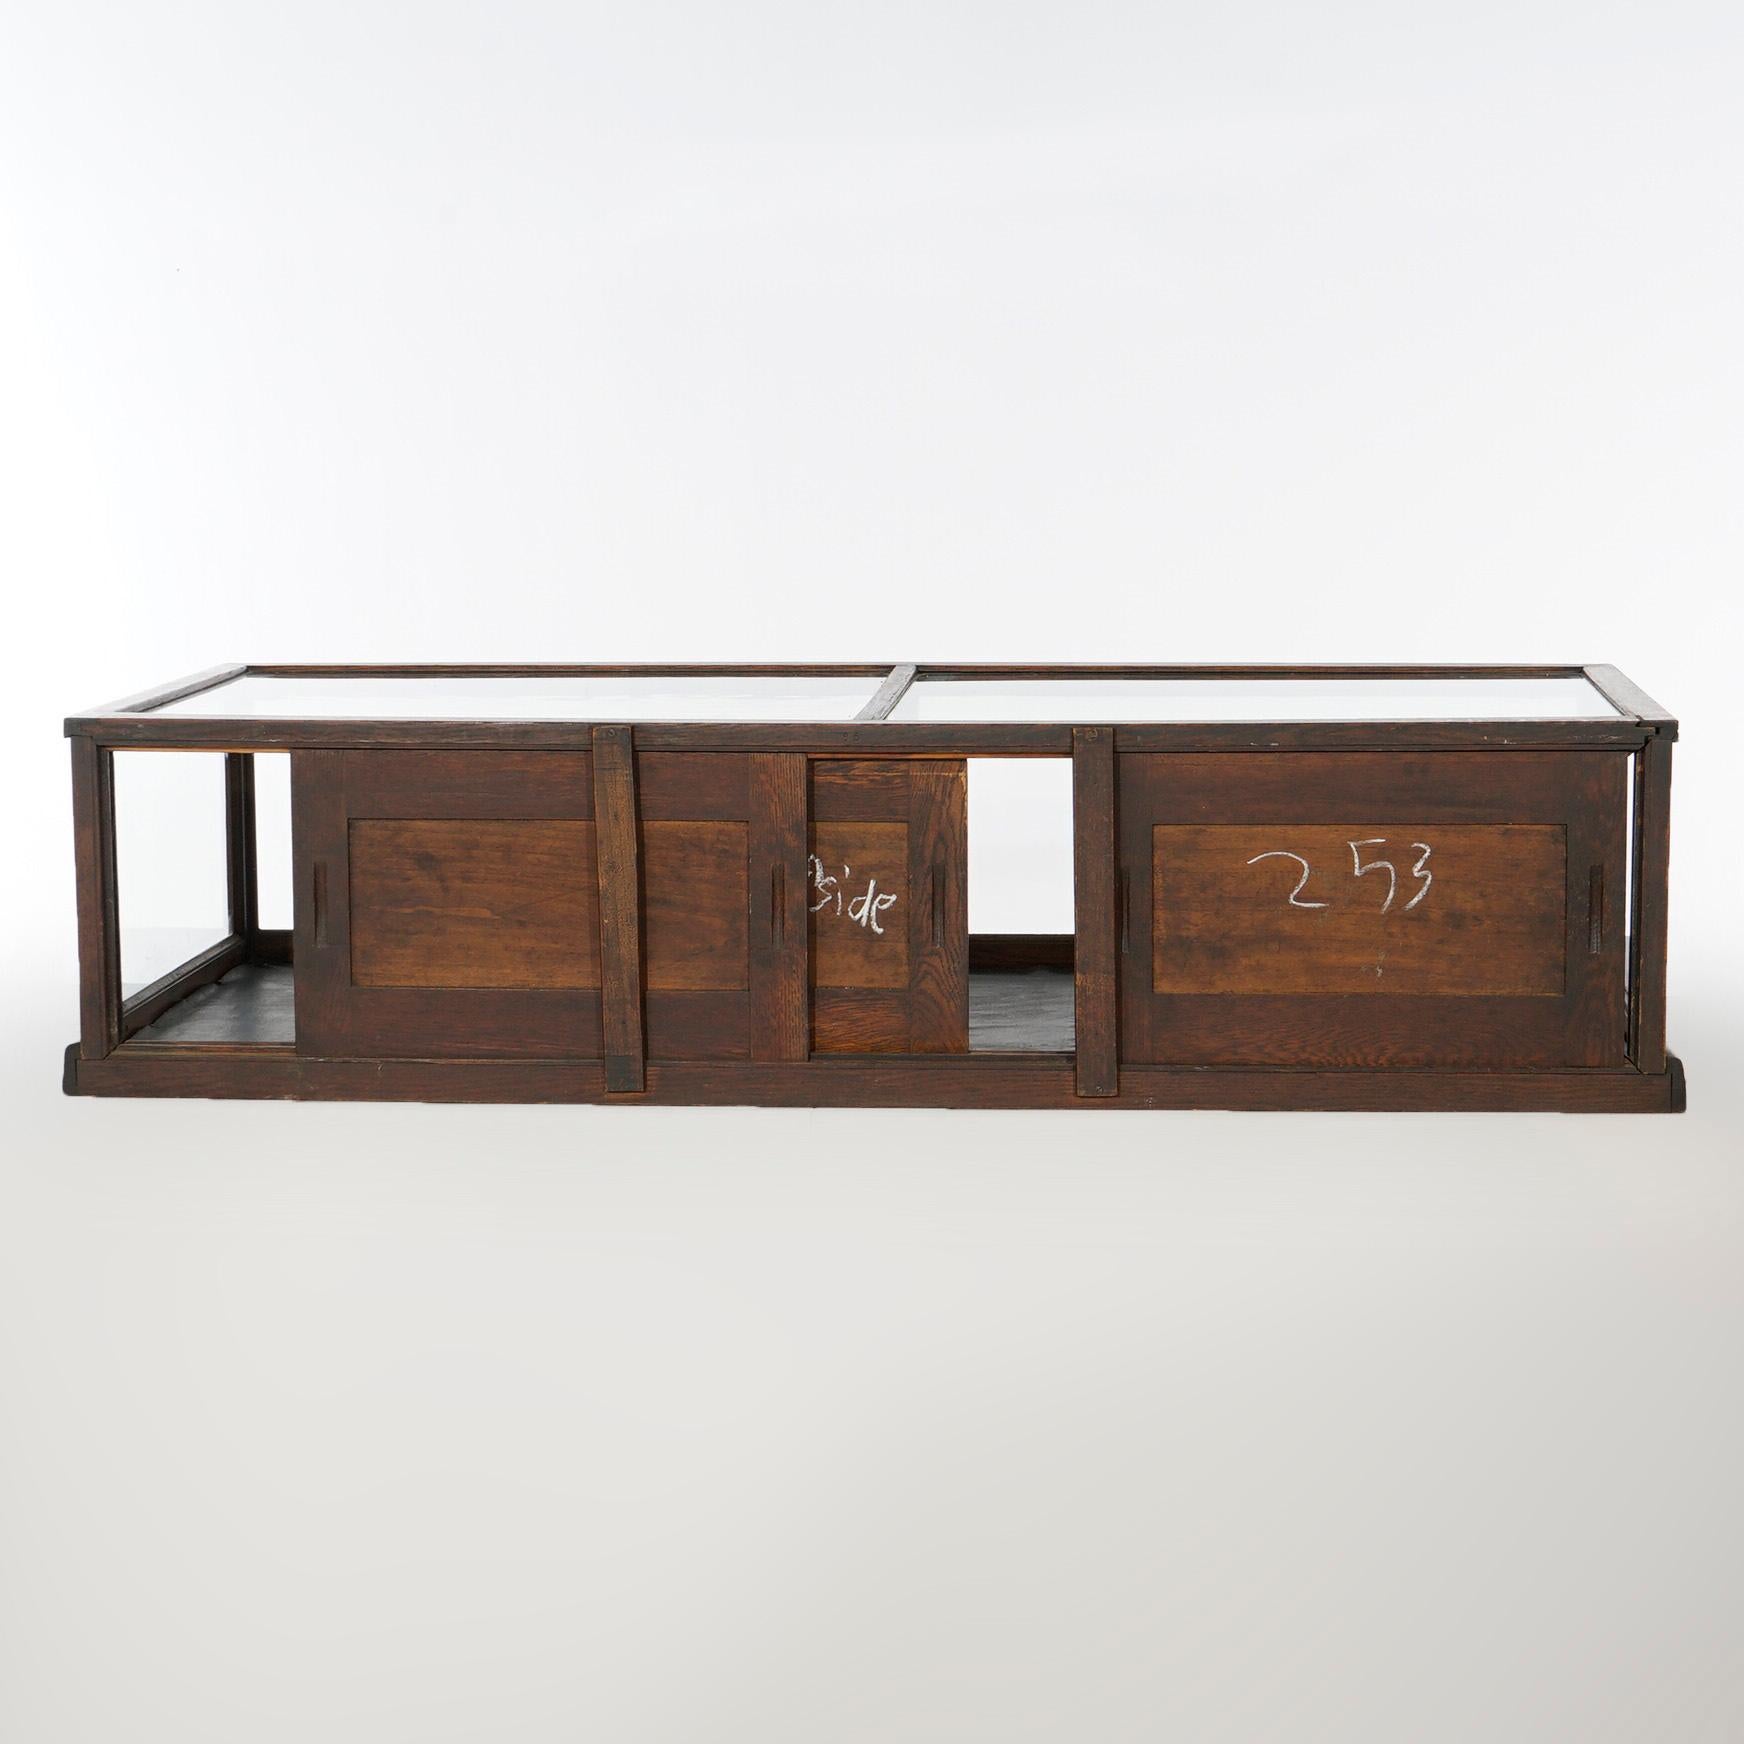 American Antique Country Store Oak & Glass Flat Top Sun Mfg. Counter Display Case, c1900